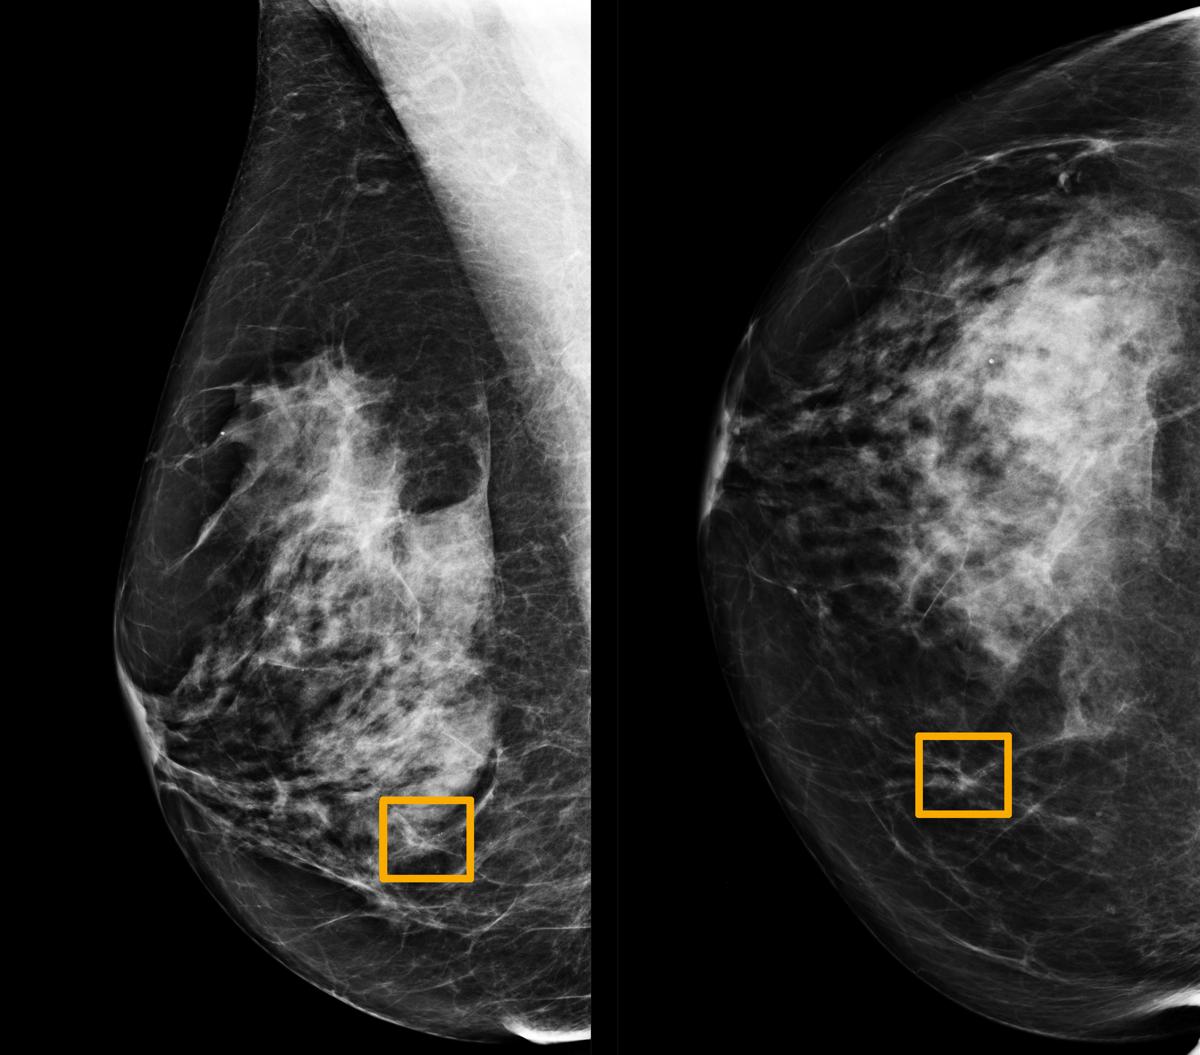 Study finds Google system could improve breast cancer detection